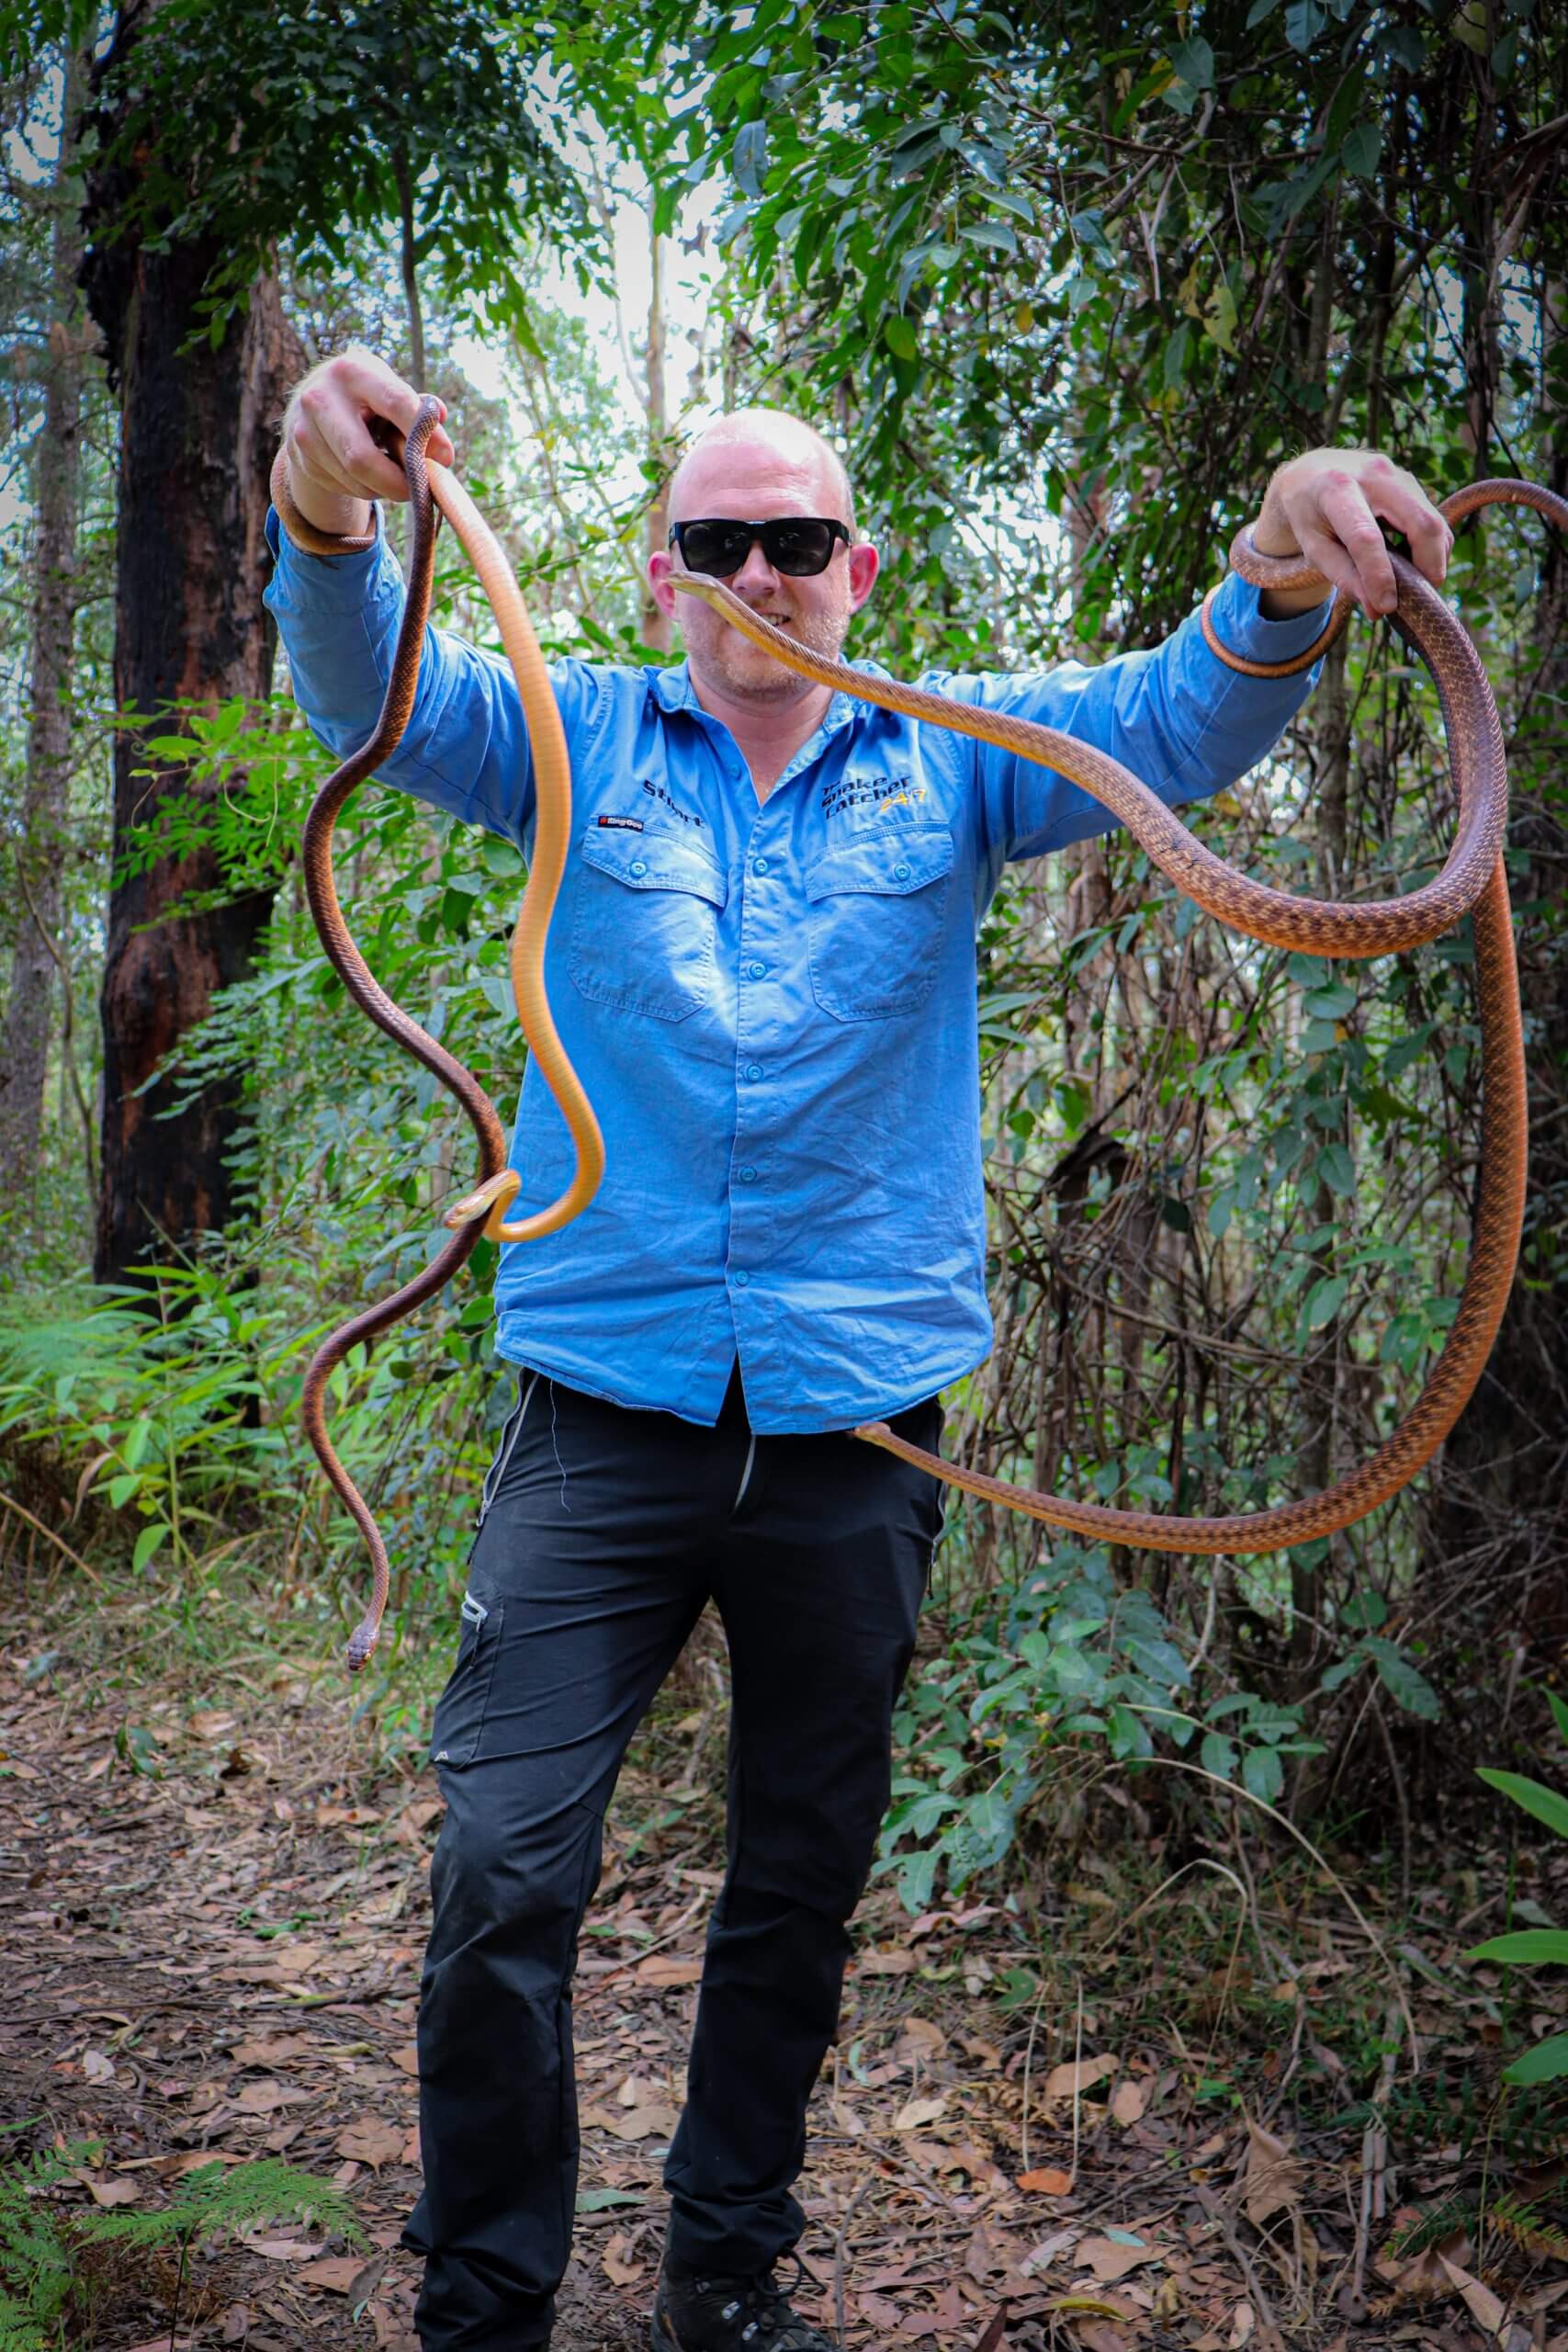 A snake catcher found two snakes during a yard inspection